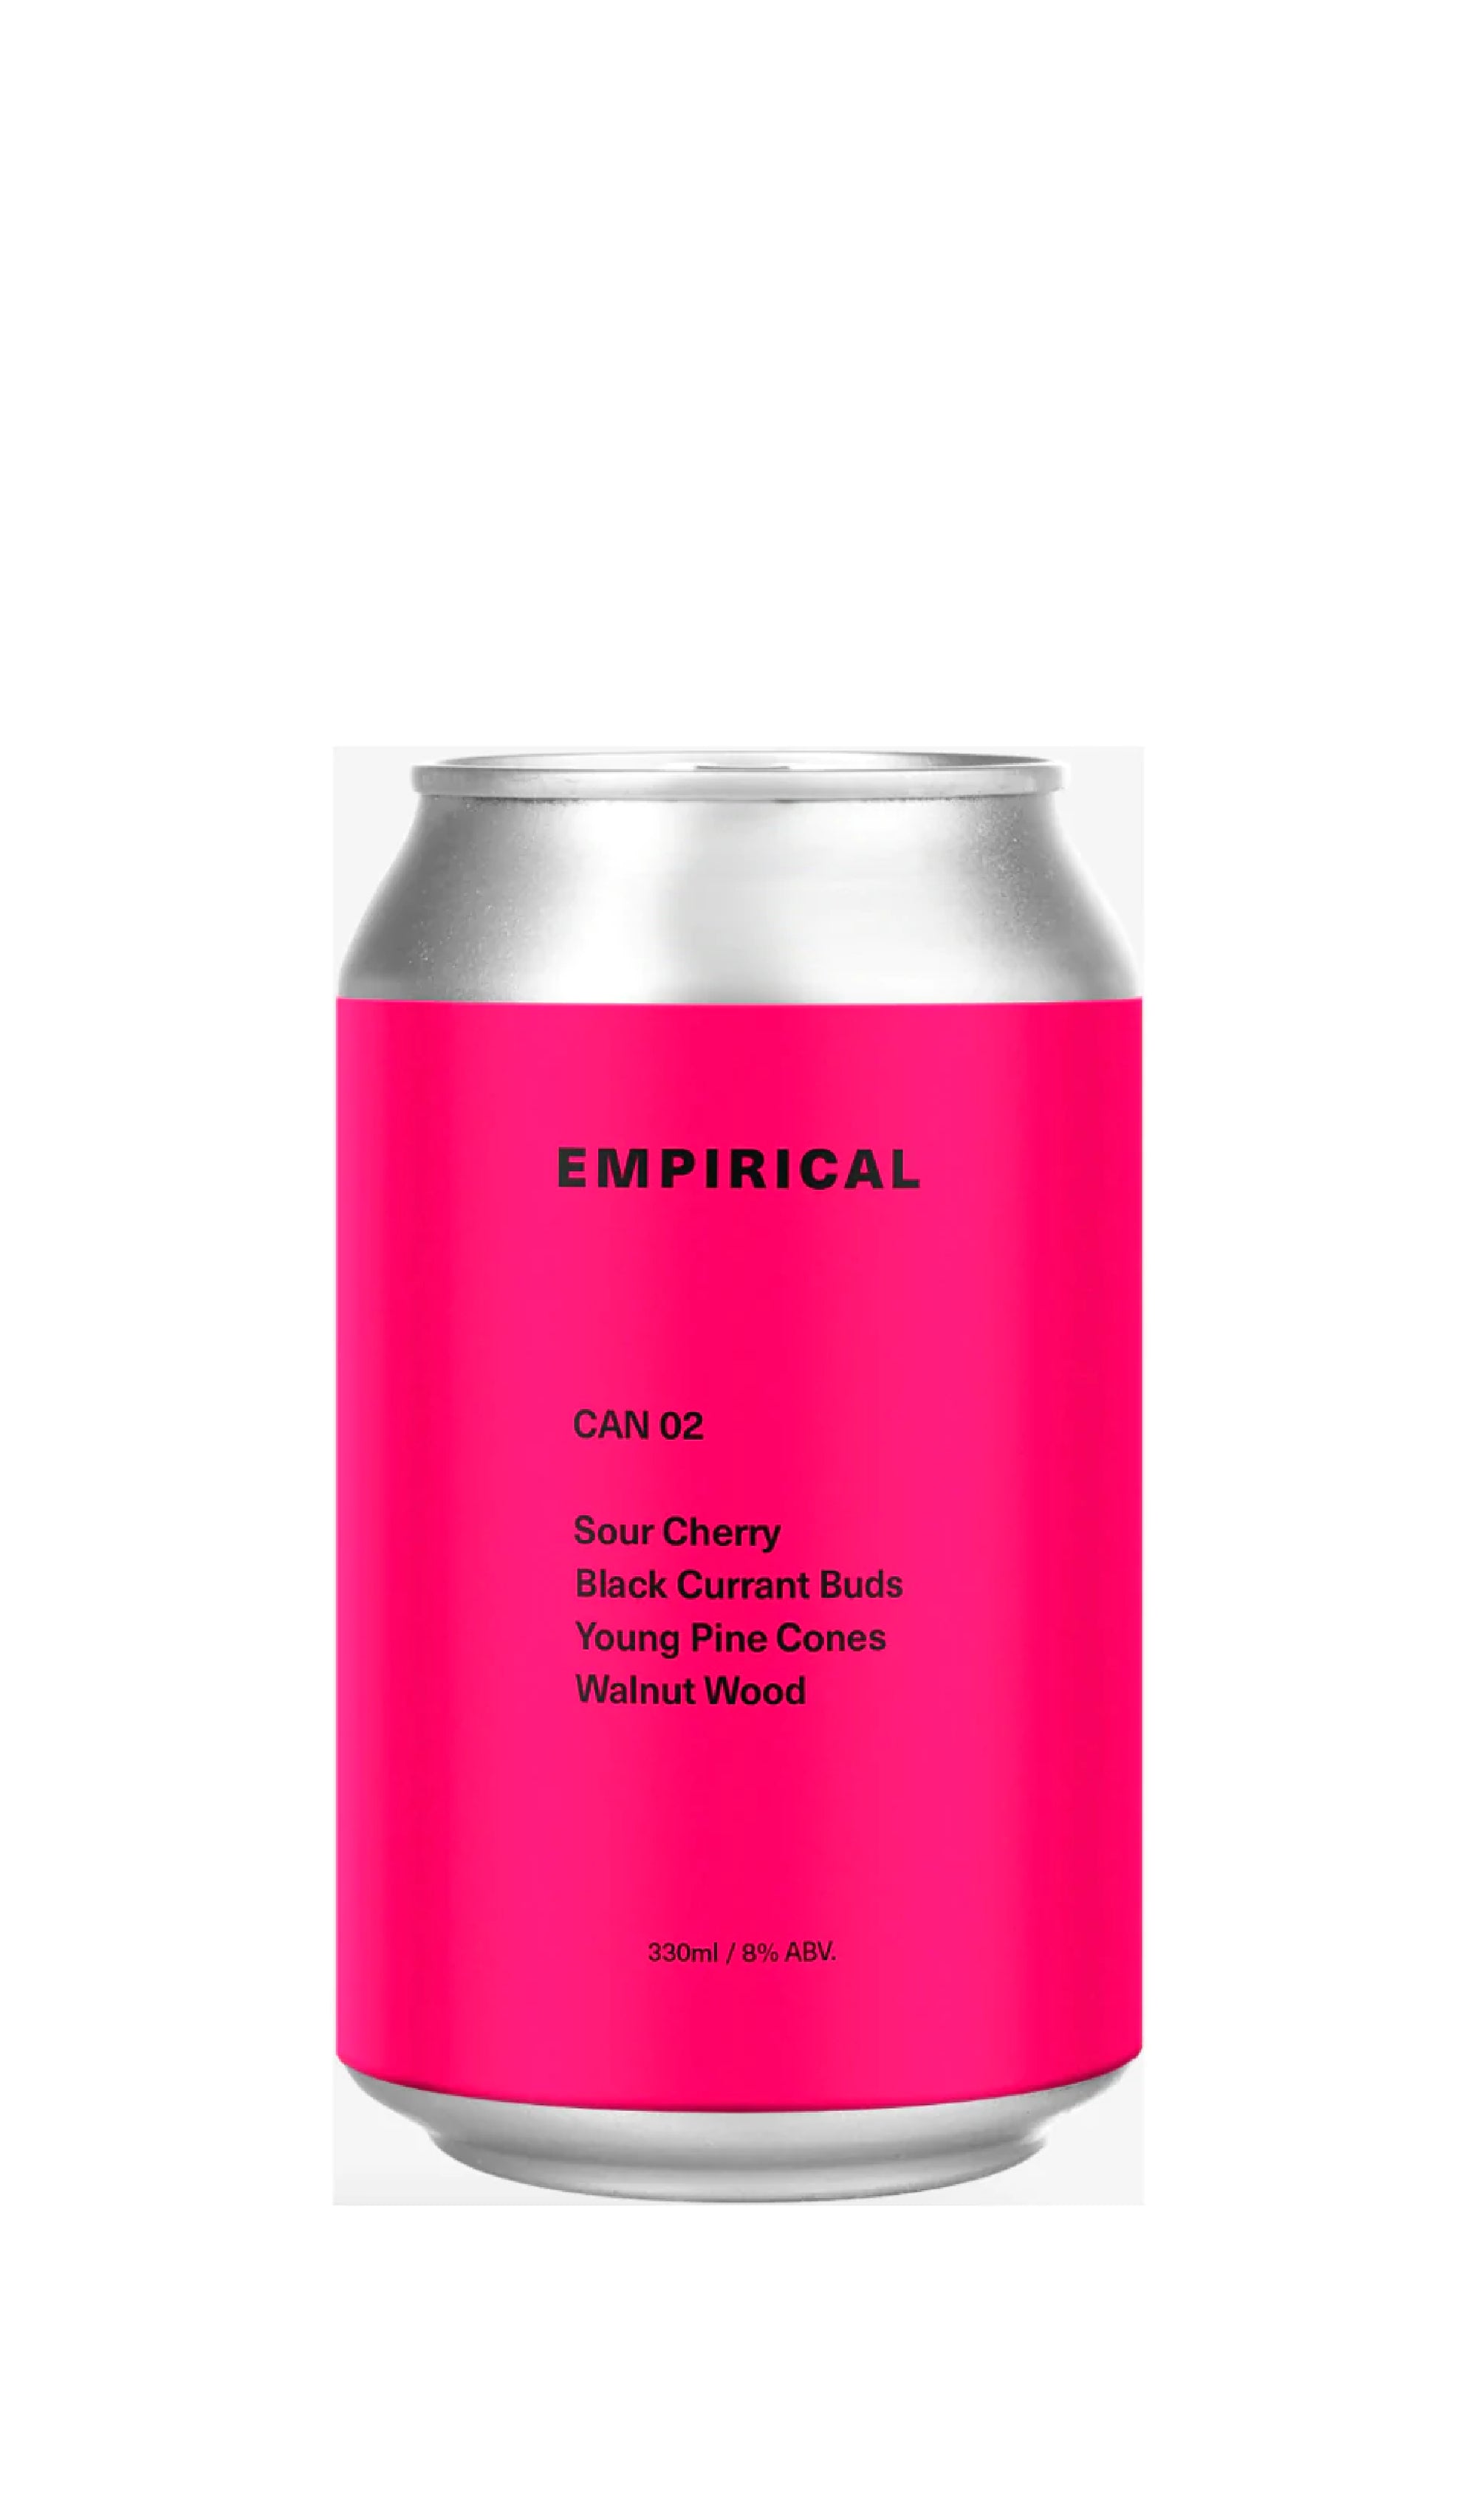 Empirical - "CAN 02" Sour Cherry/Black Currant Buds/Young Pine Cones Cocktail (Can - 355ml)